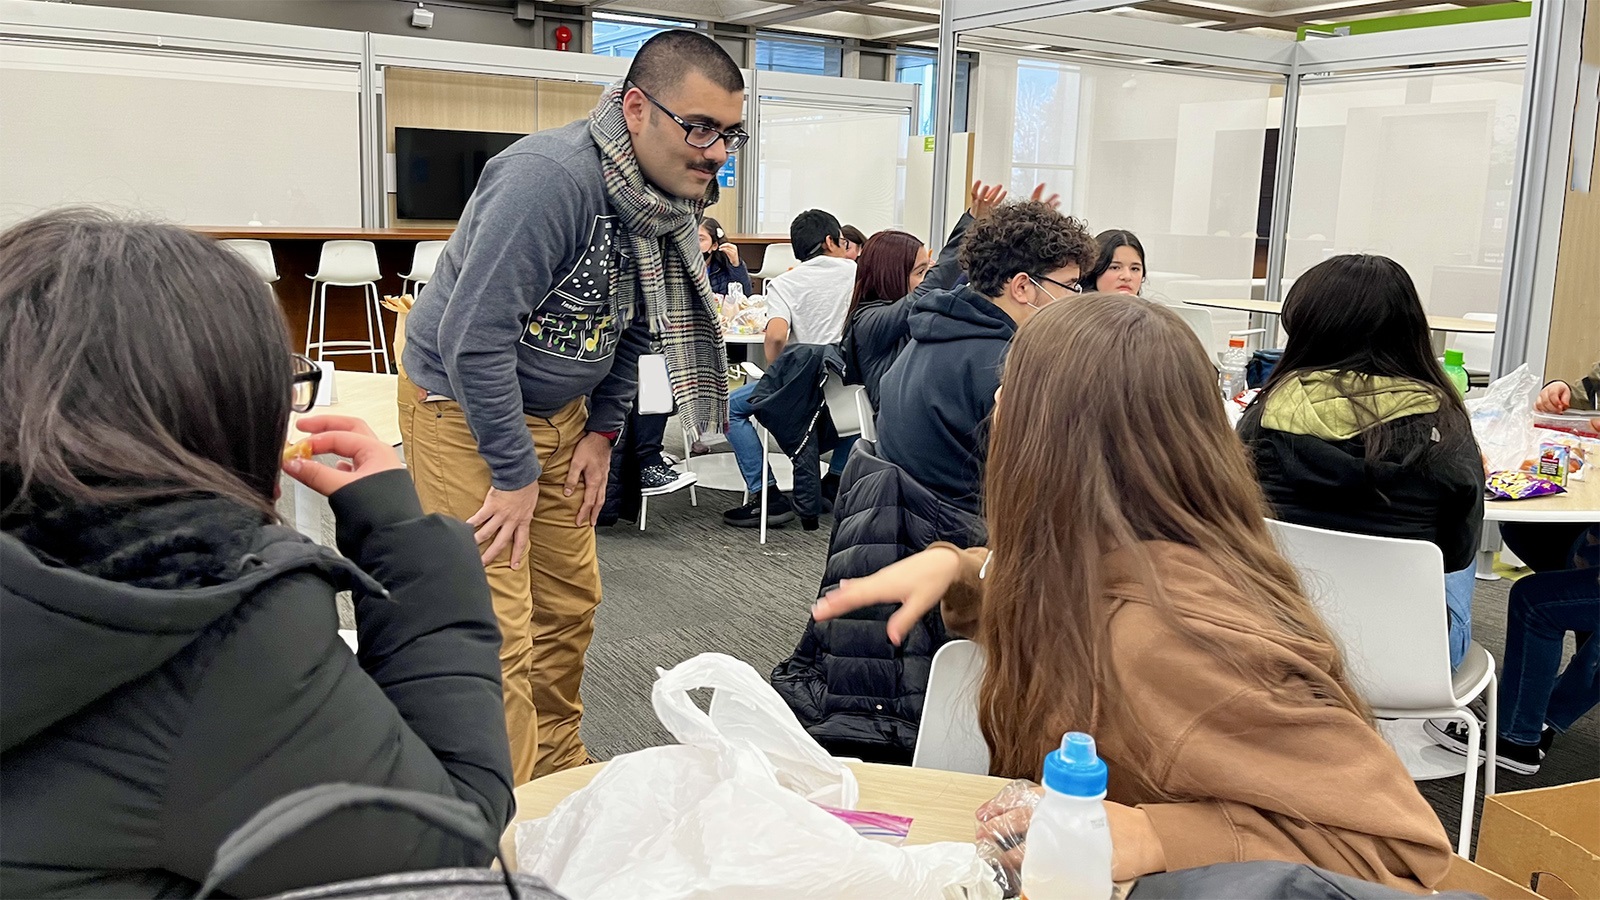 Students having lunch for Learning Lab unexpectedly met a passing researcher, who was happy to do an impromptu Q&A; while these encounters aren’t a guaranteed part of Learning Labs programming, you never know who you might meet in your visit.